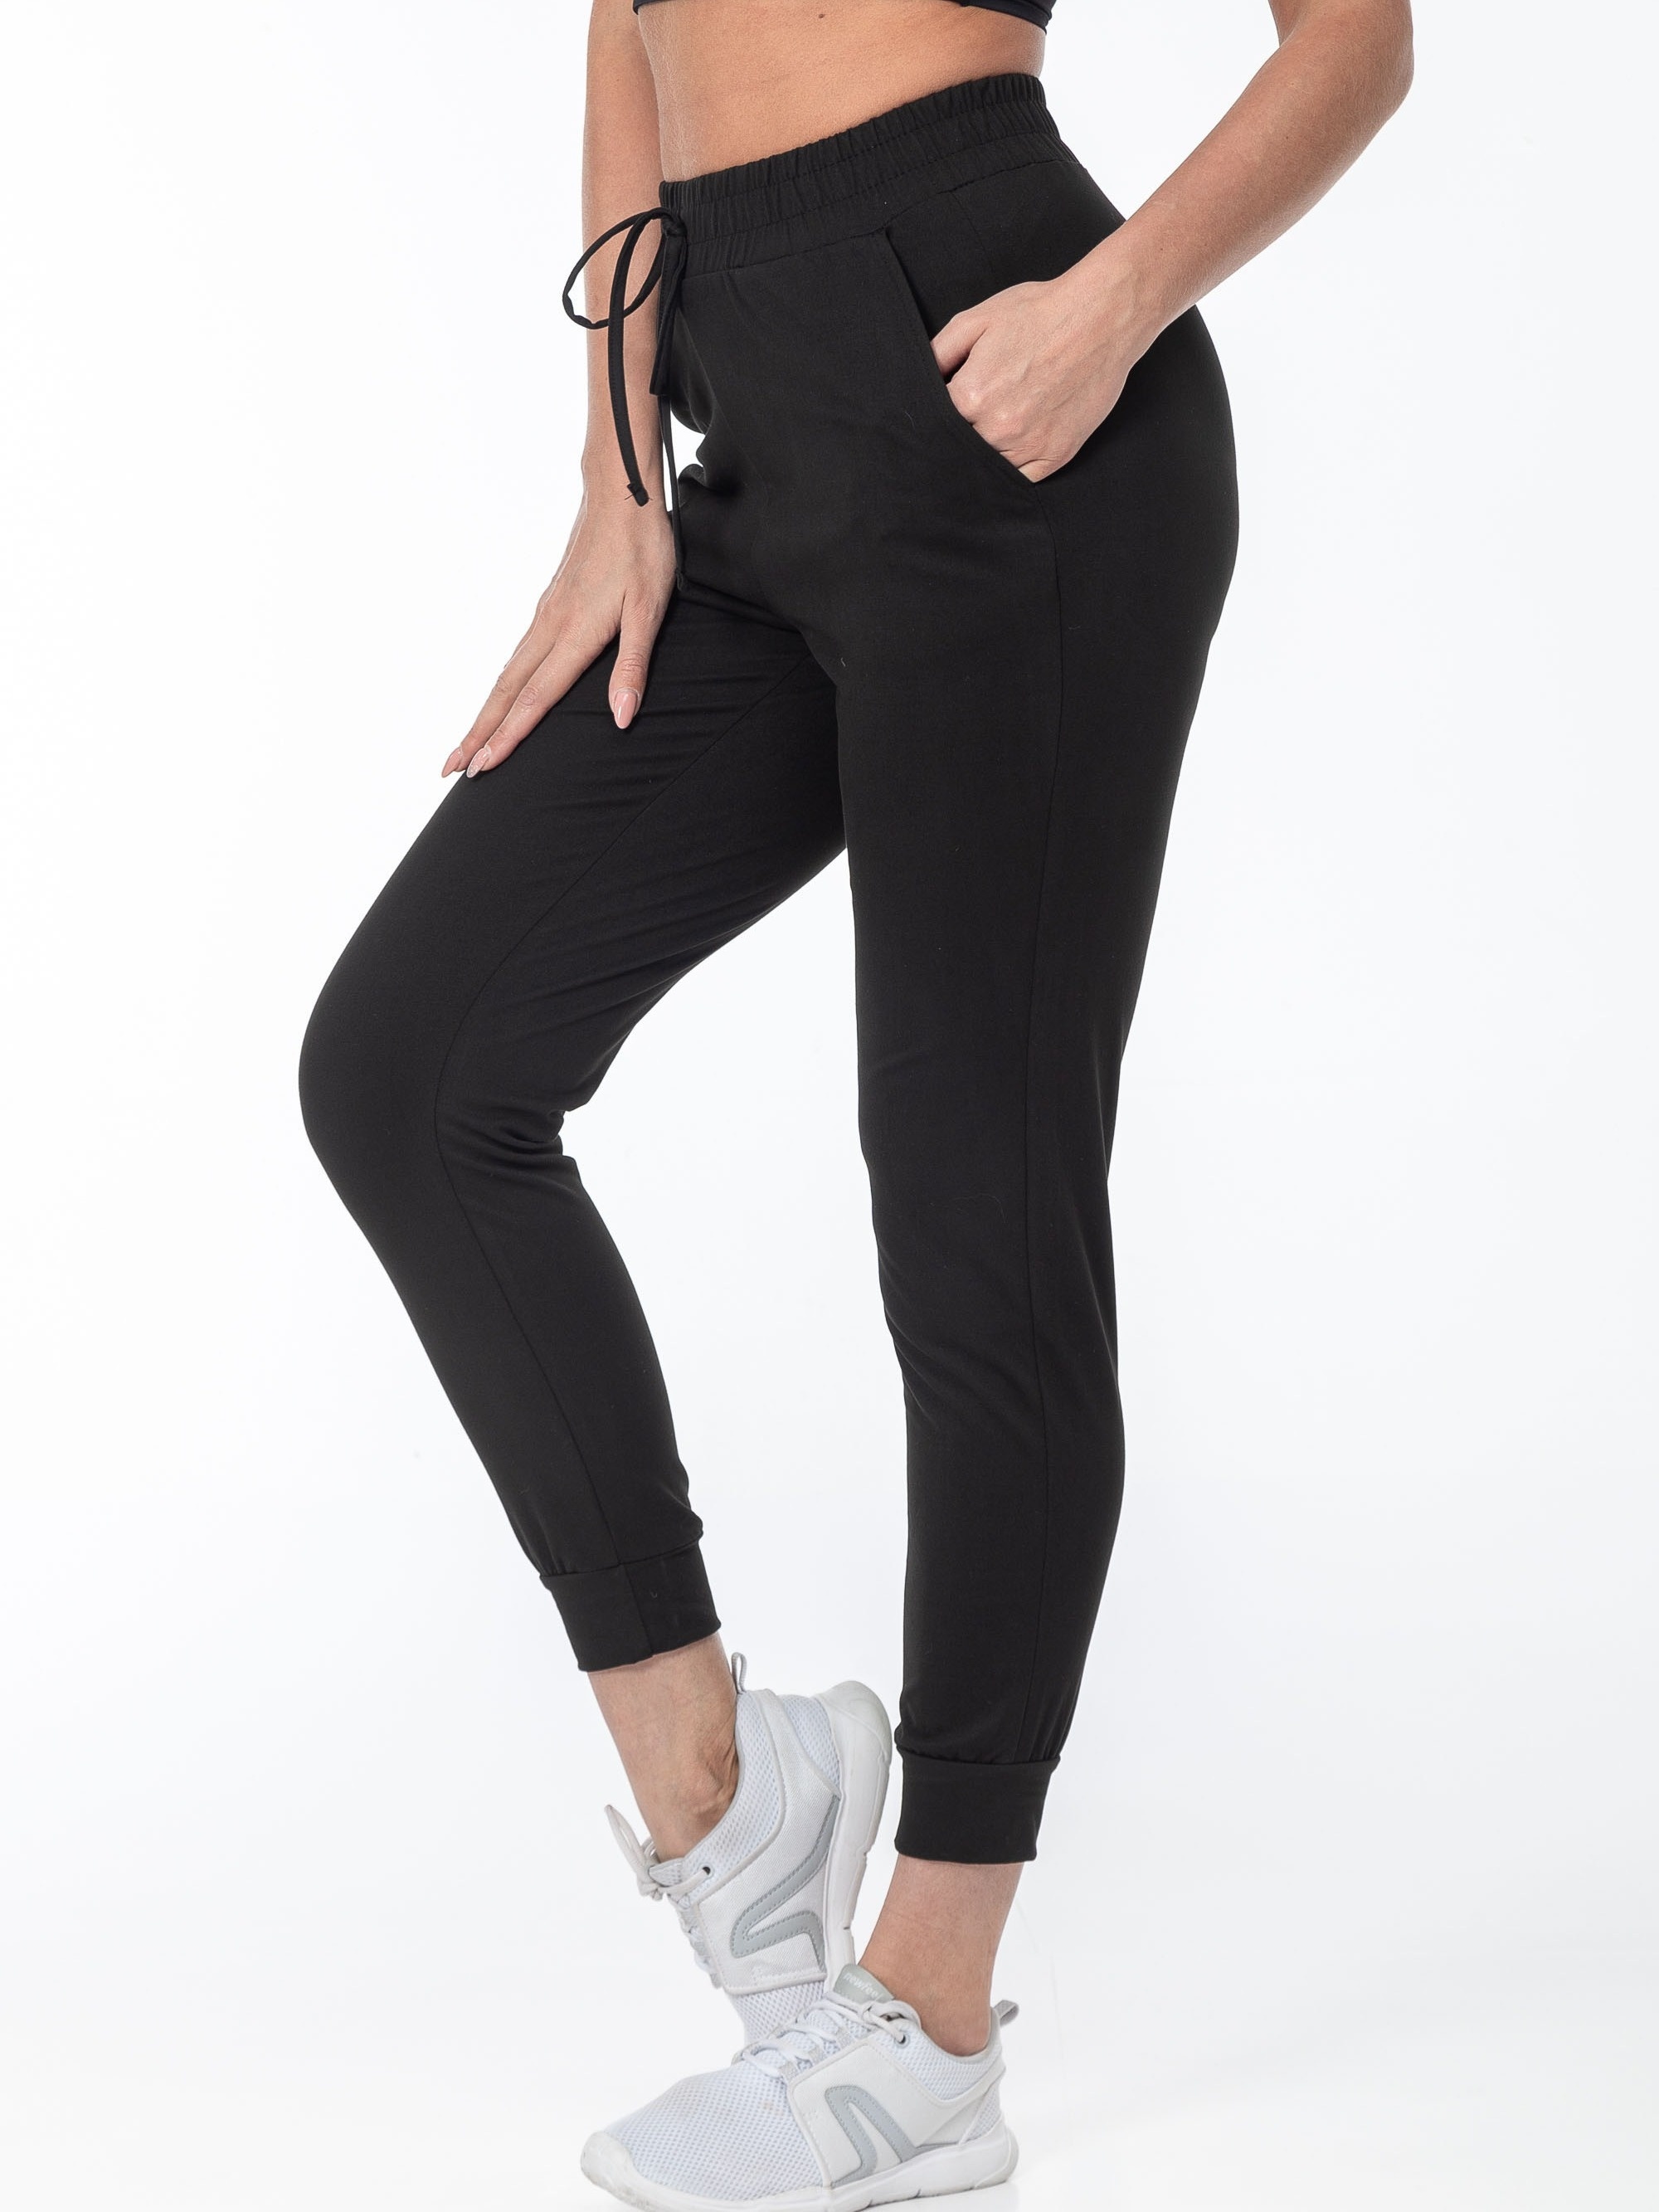 solid color casual pants high stretch running jogging pants with pocket womens activewear details 10